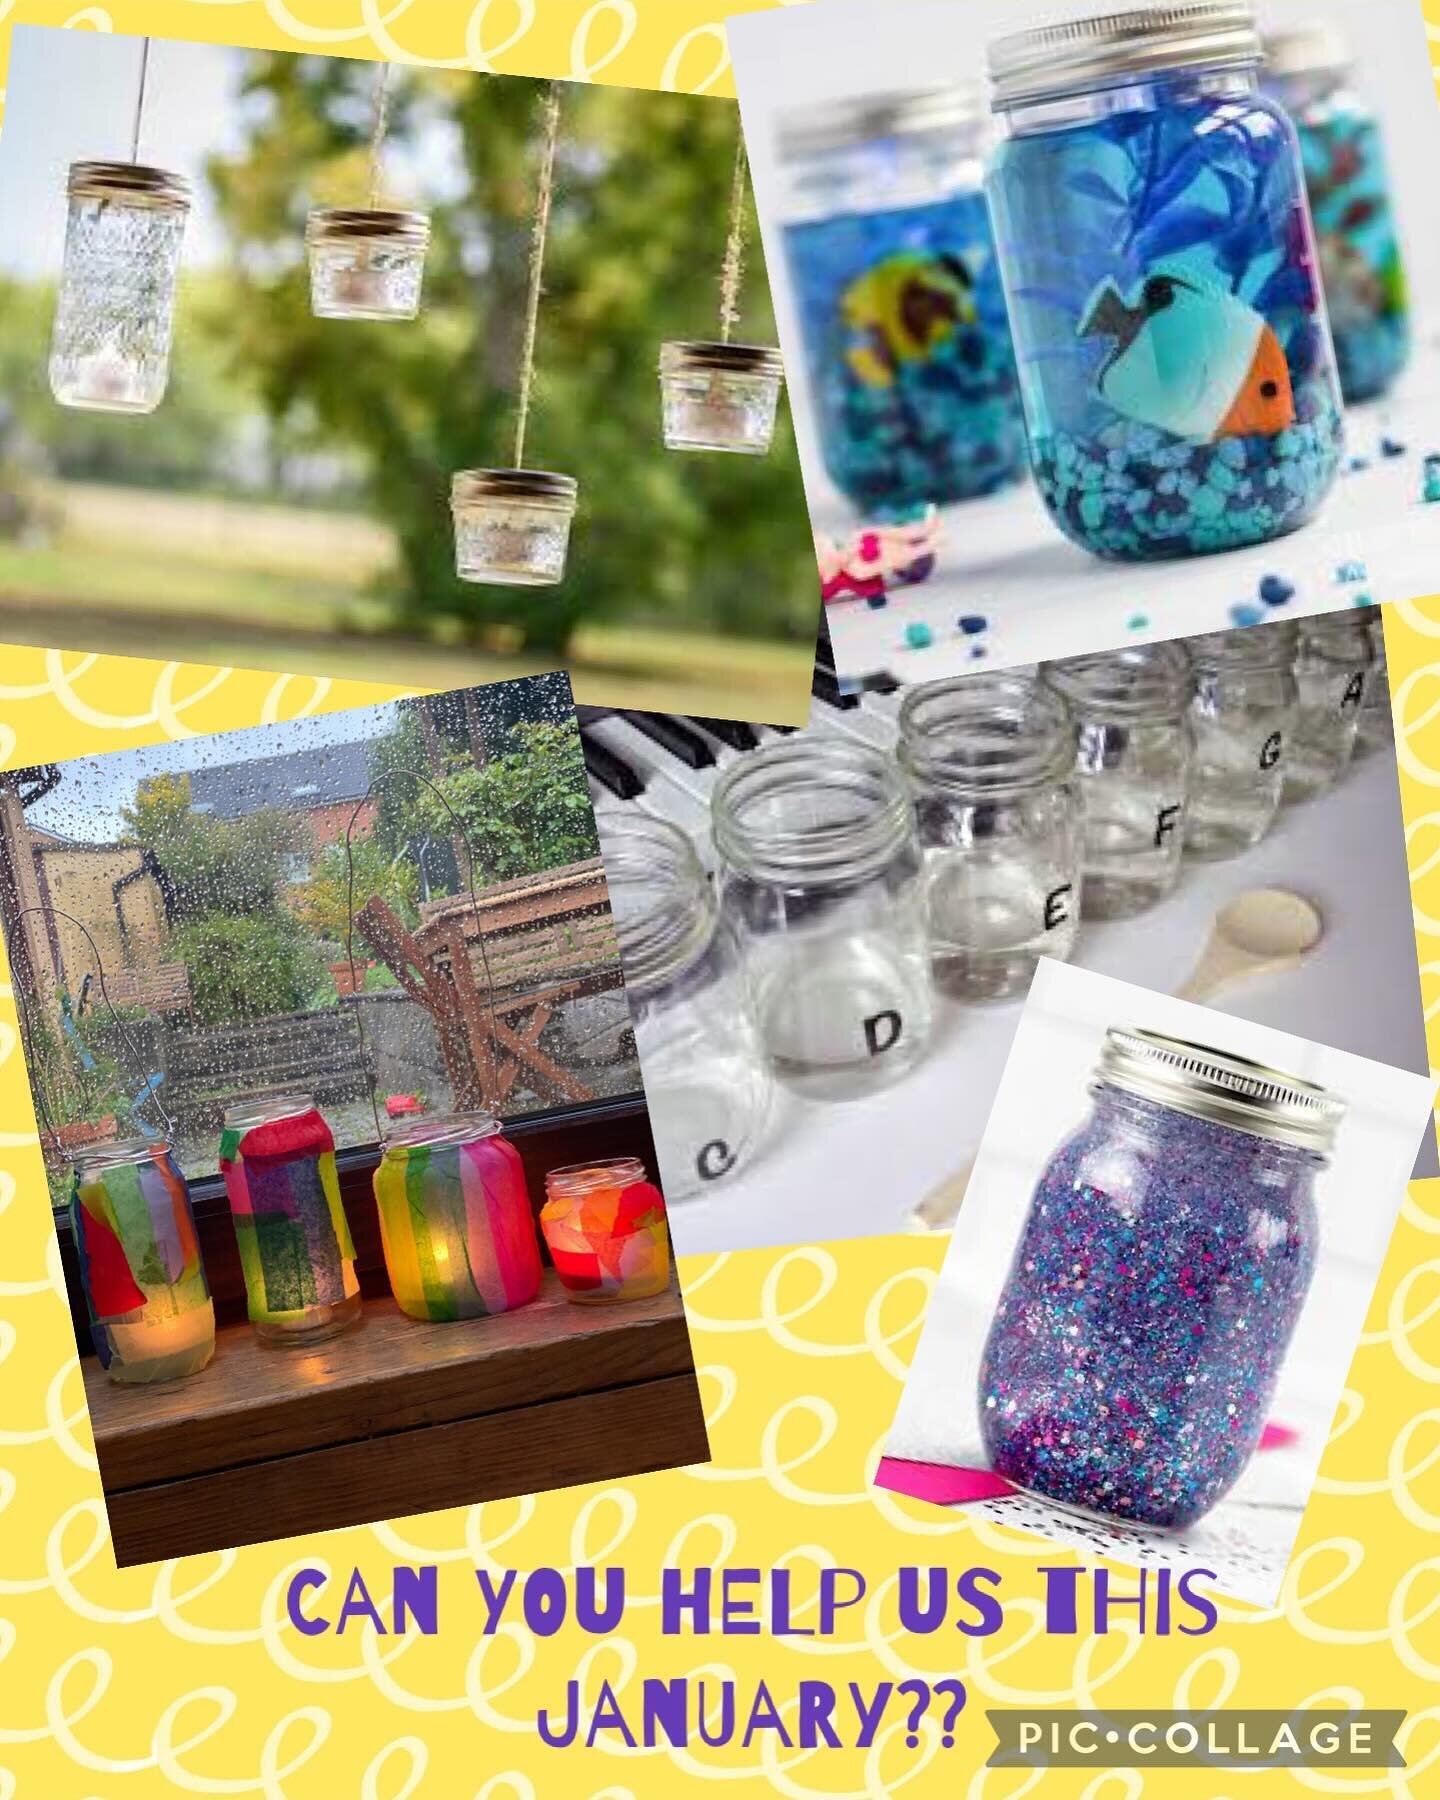 ♻️ This month - Donate your jam jars to us 💫
..
..
Did you know that each UK household produces over 1 tonne of waste per year? This is the weight of a small car! It&rsquo;s even more shocking that up to 60% of the waste that ends up in the bin coul